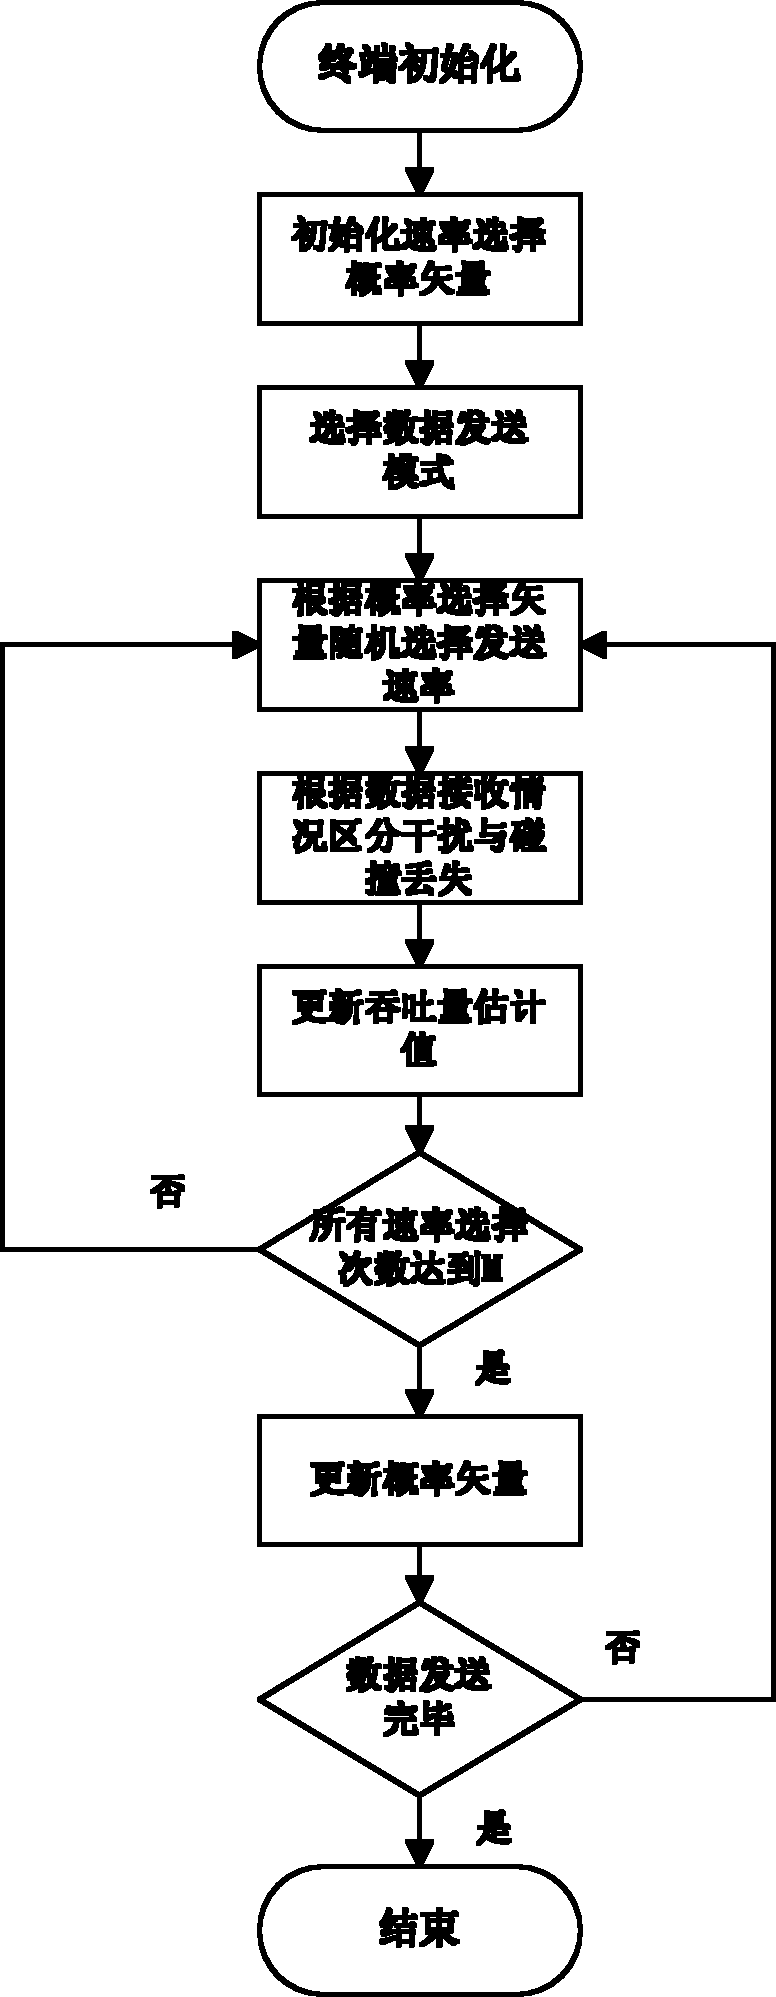 High throughput WLAN (Wireless Local Area Network) Mesh network rate selection method